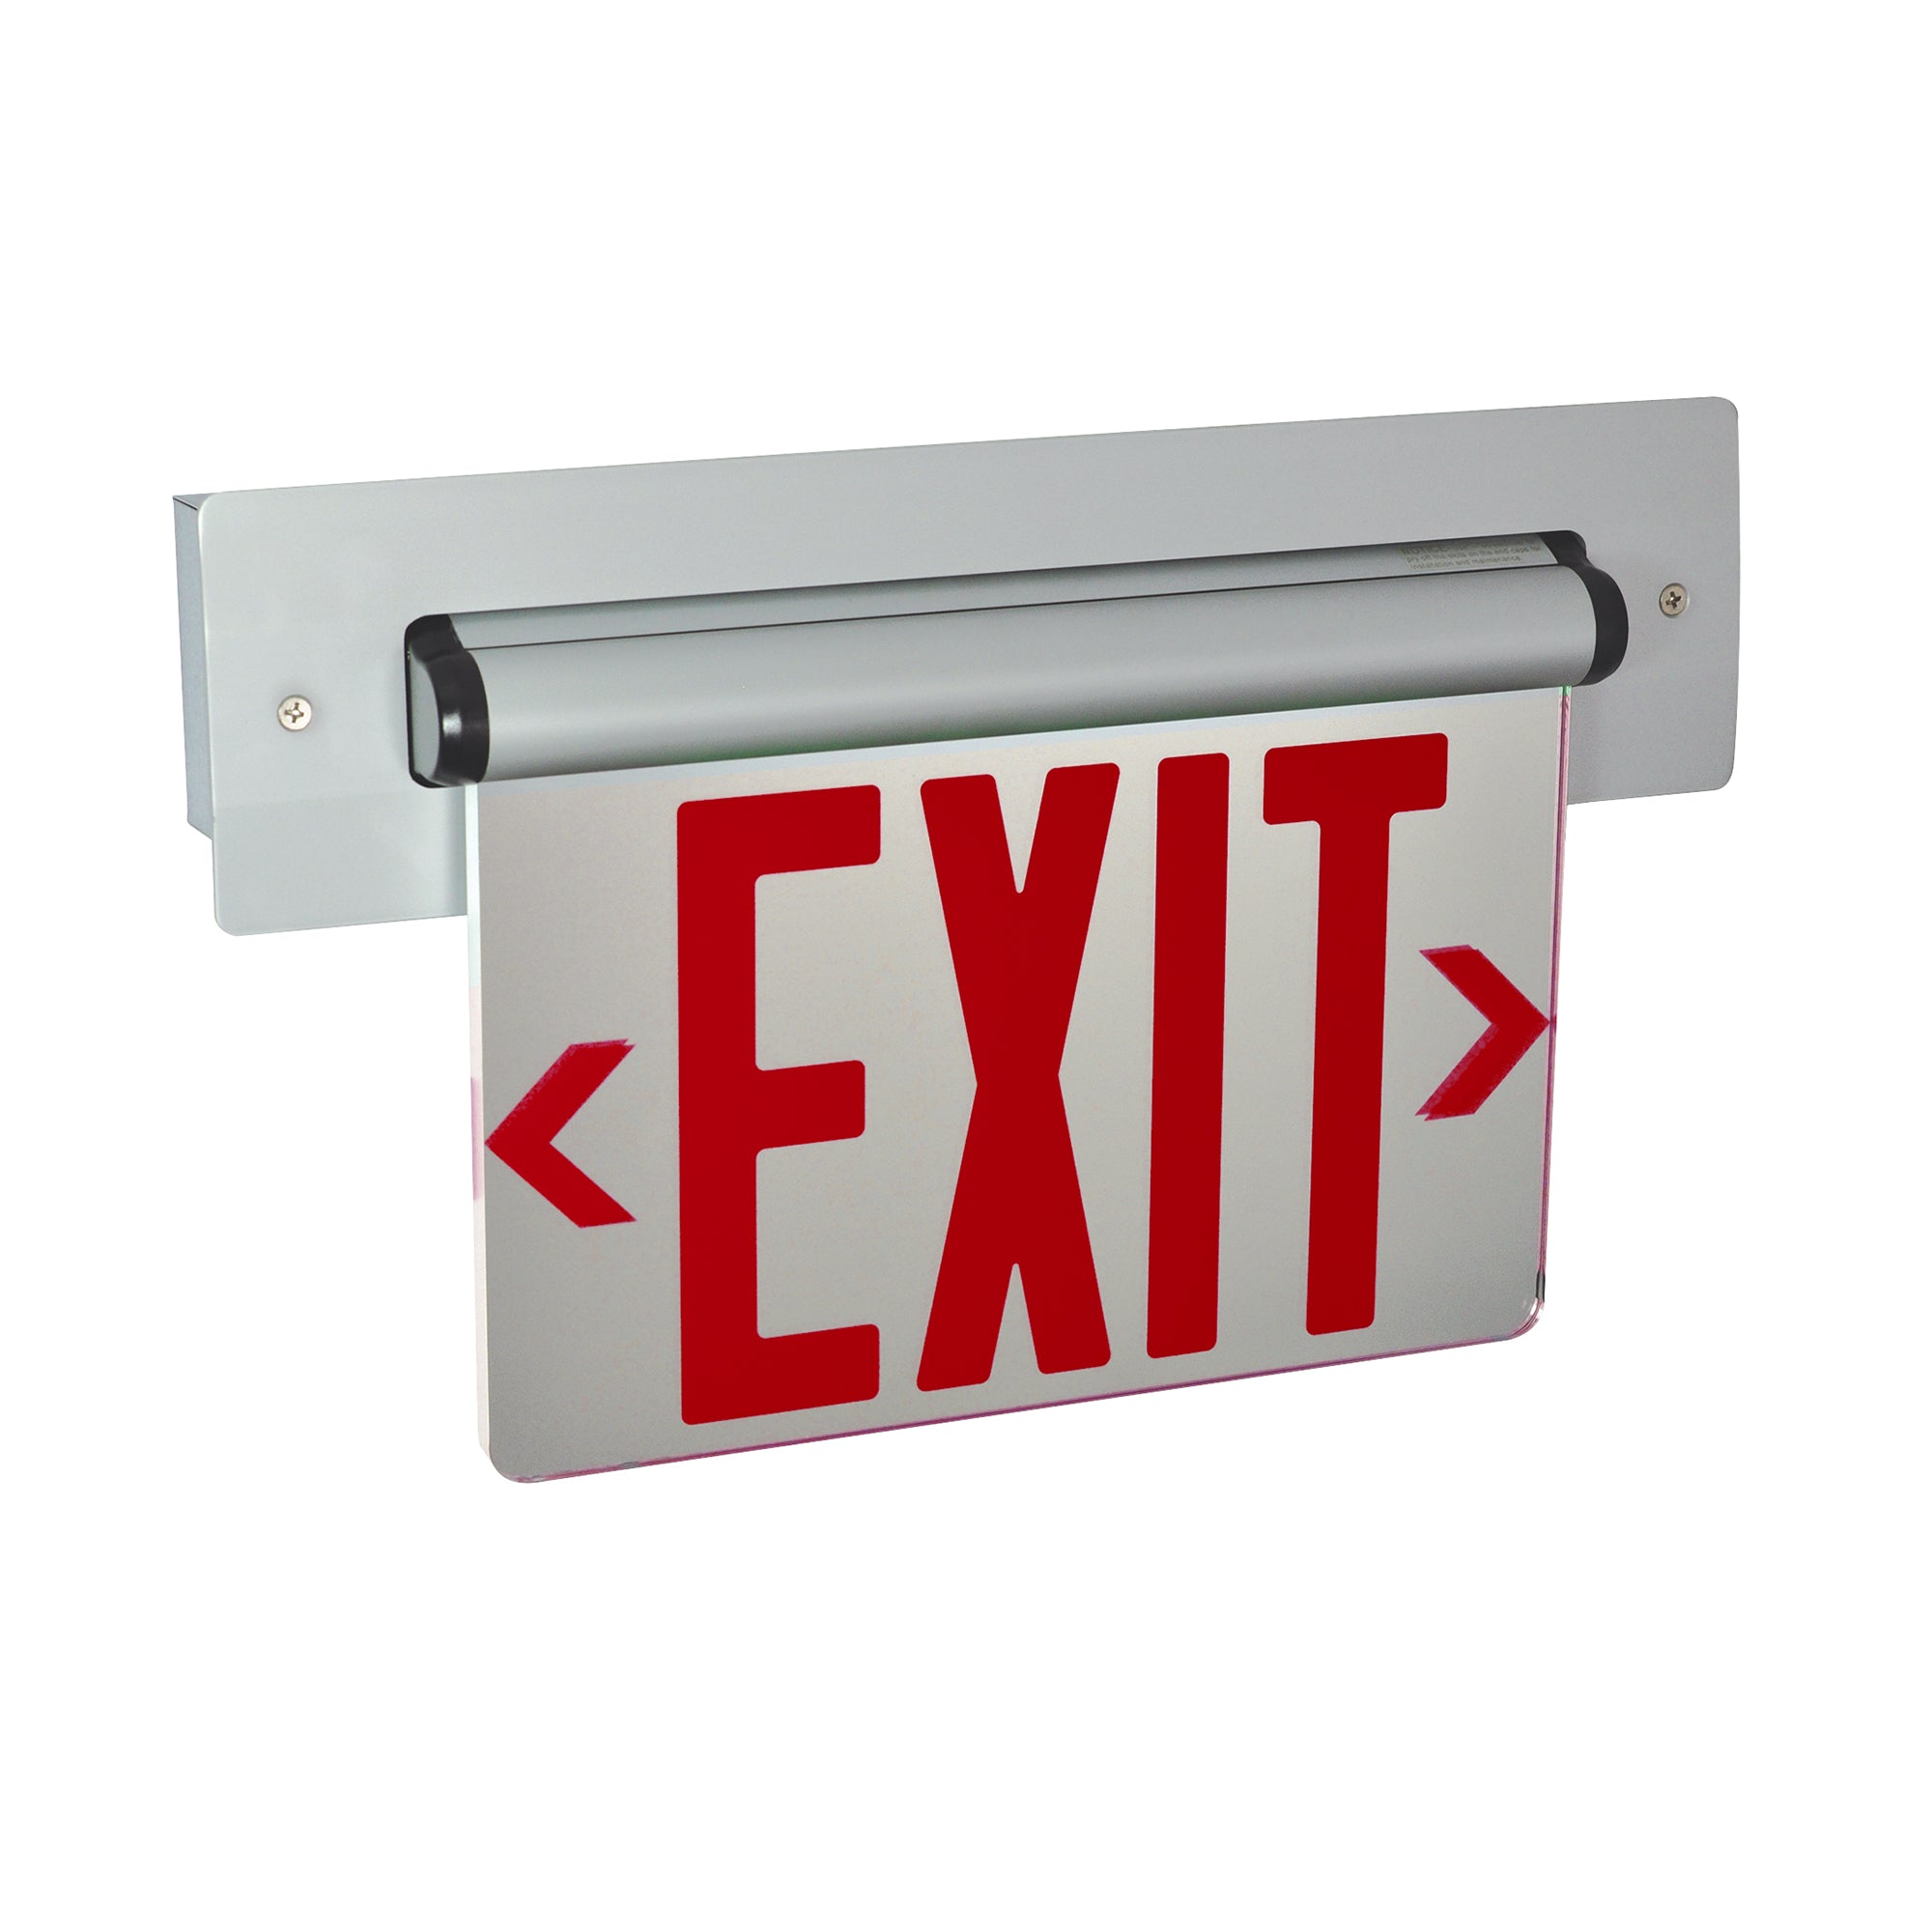 Nora Lighting NX-814-LEDR2MW - Exit / Emergency - Recessed Adjustable LED Edge-Lit Exit Sign, 2 Circuit, 6 Inch Red Letters, Double Face / Mirrored Acrylic, White Housing